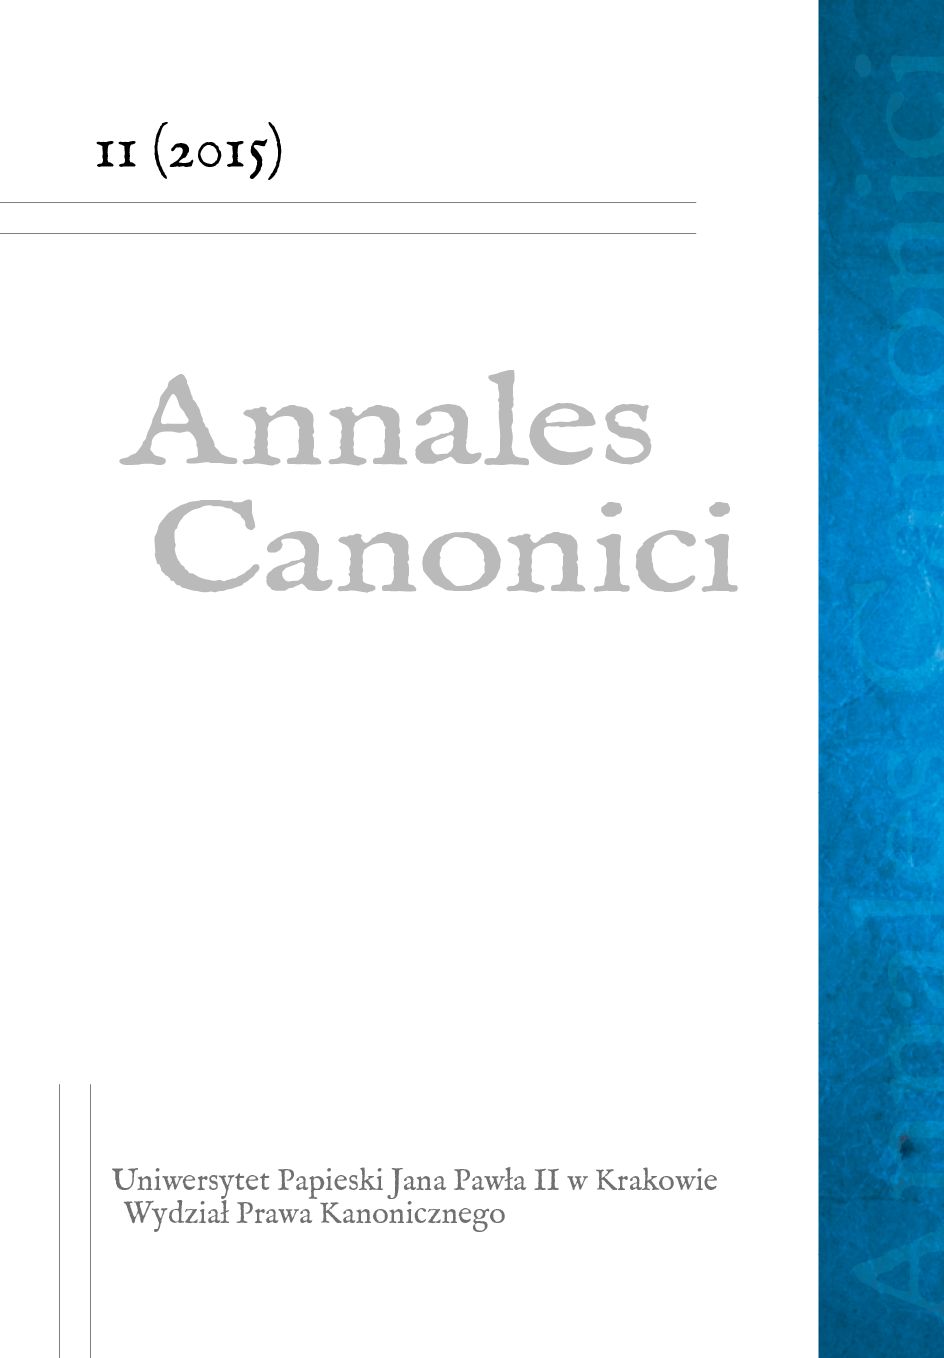 The general characteristic of the Faculty of Canon Law of the Pontifical University of John Paul II in Krakow Cover Image